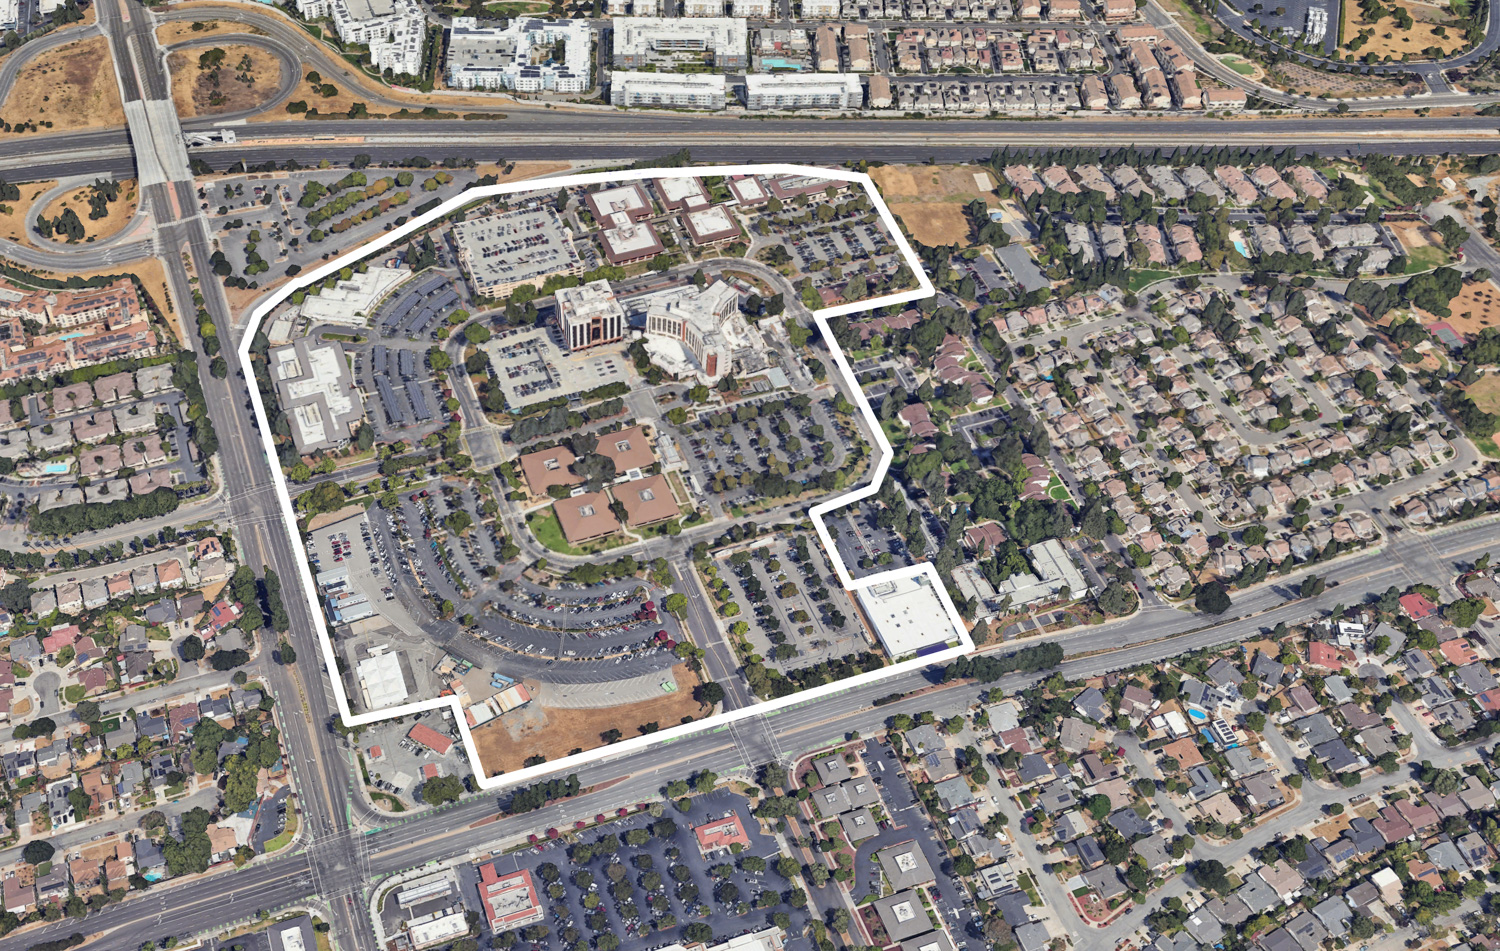 Kaiser San Jose Medical Center, image by Google Satellite outlined approximately by YIMBY